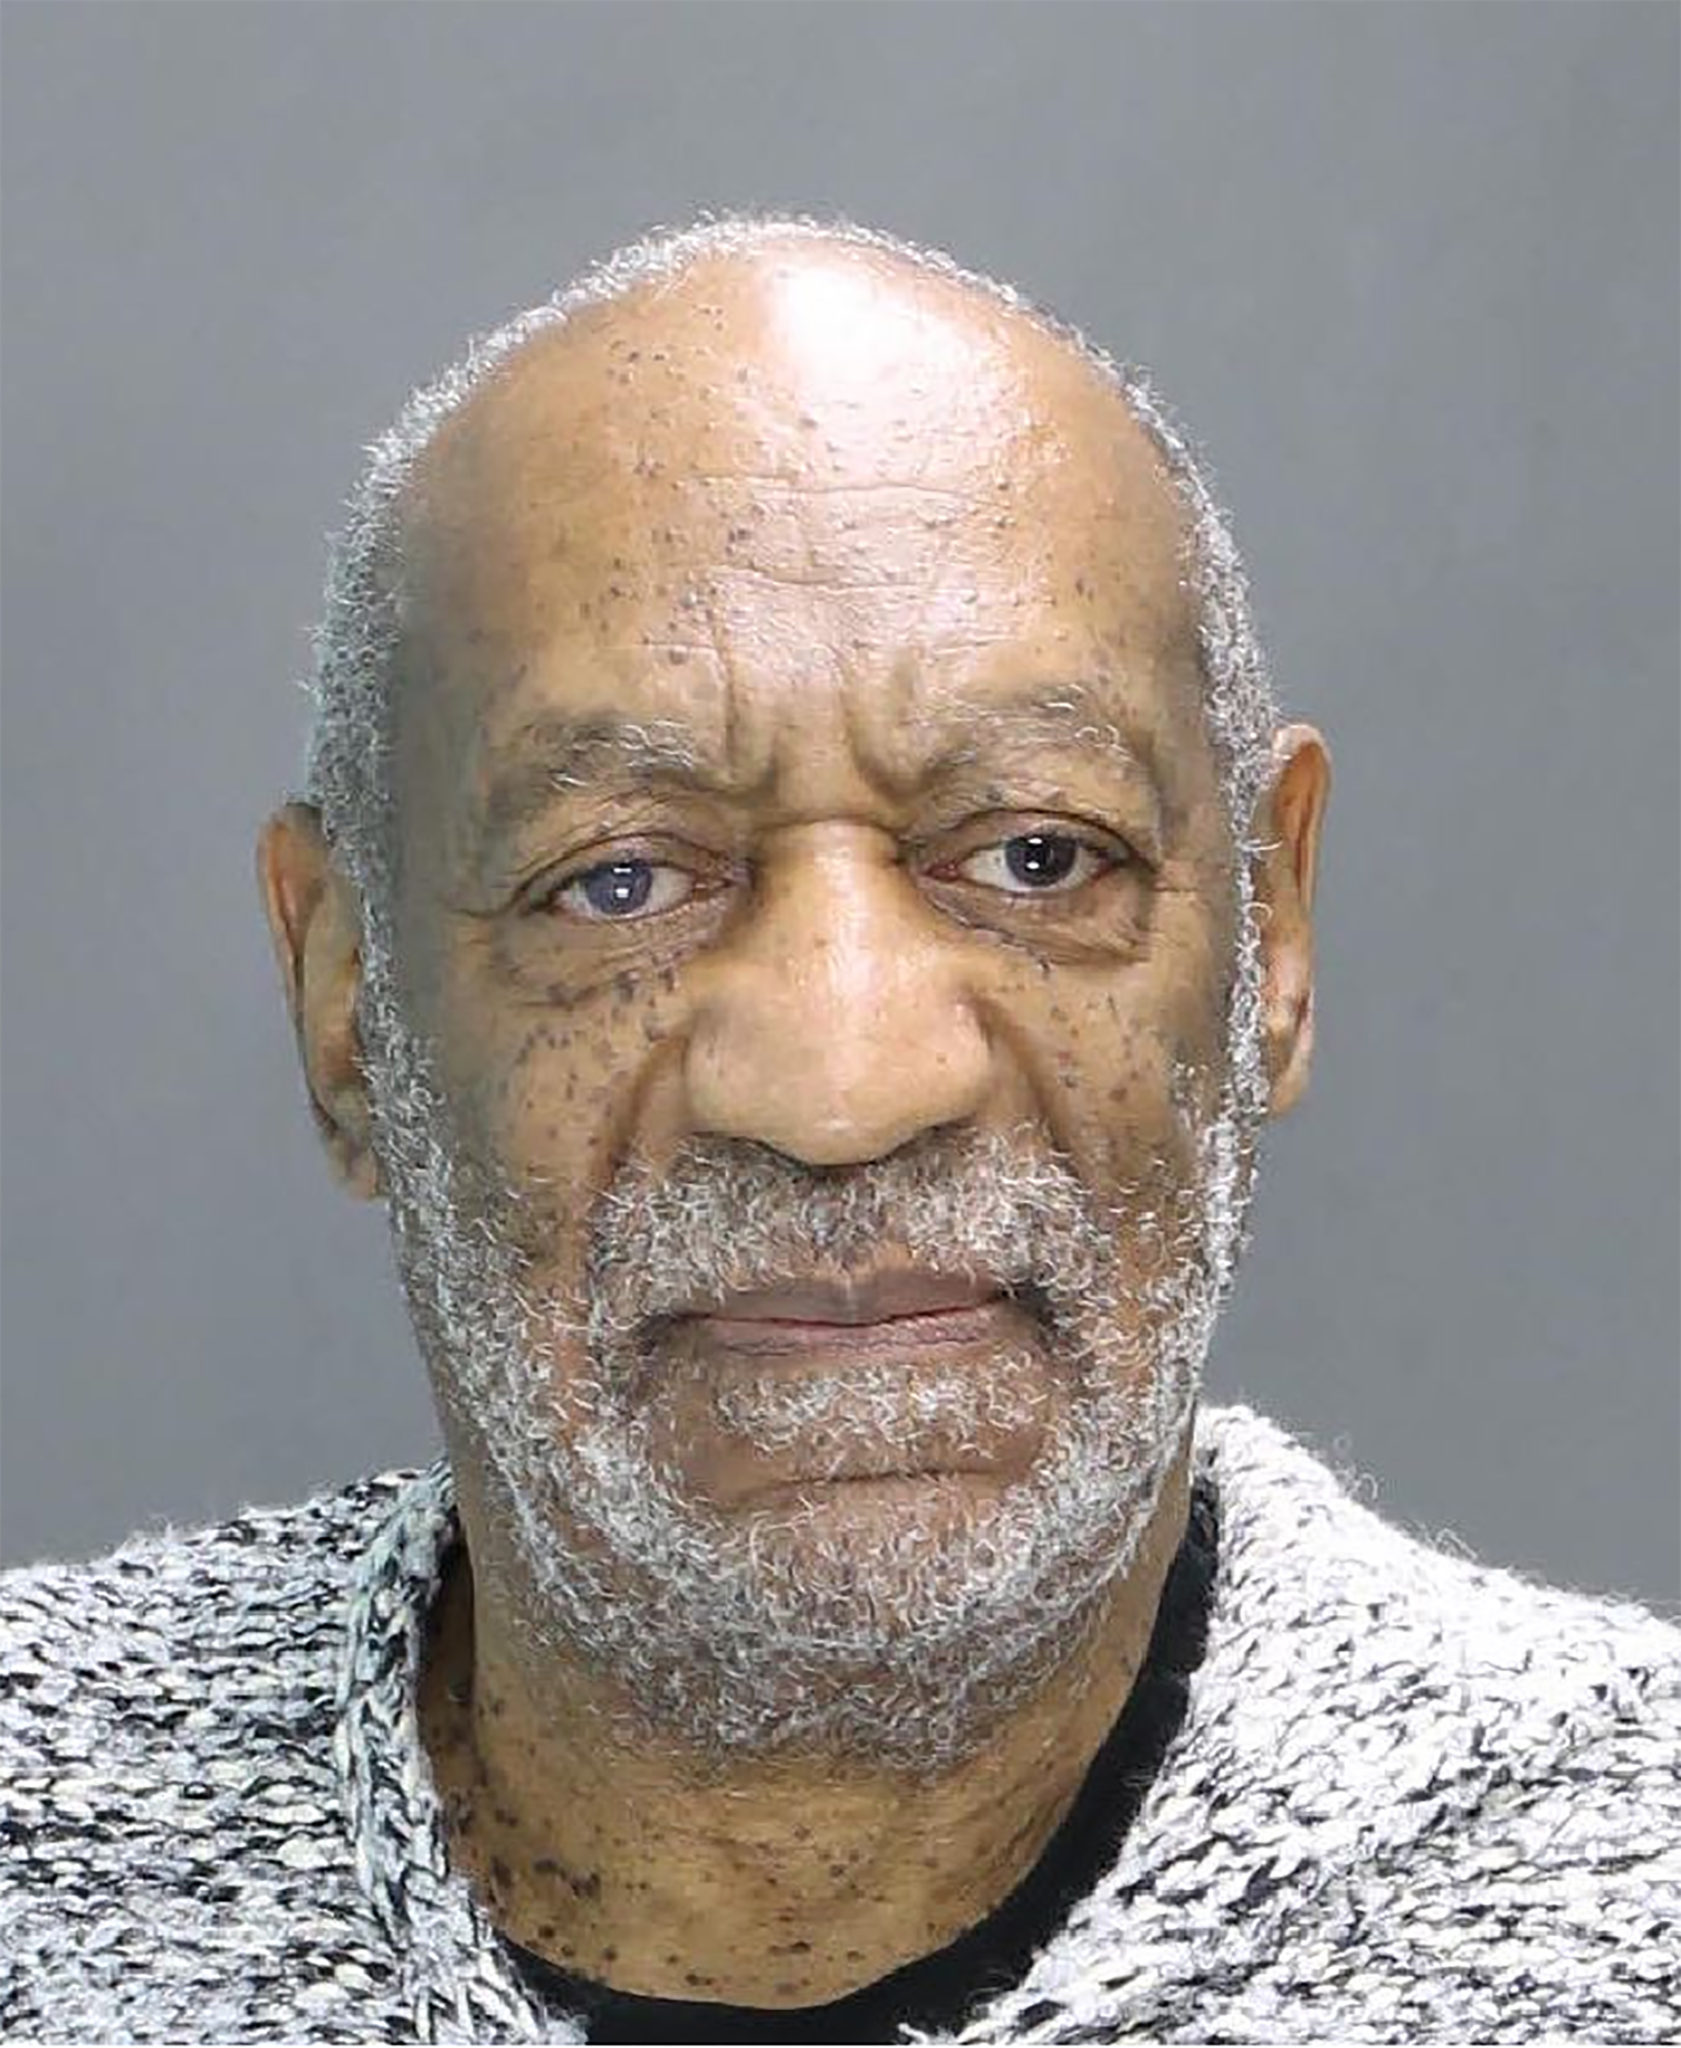 William Henry Cosby, Jr seen in a 2015 booking photo released by the The Montgomery County Office of the District Attorney.